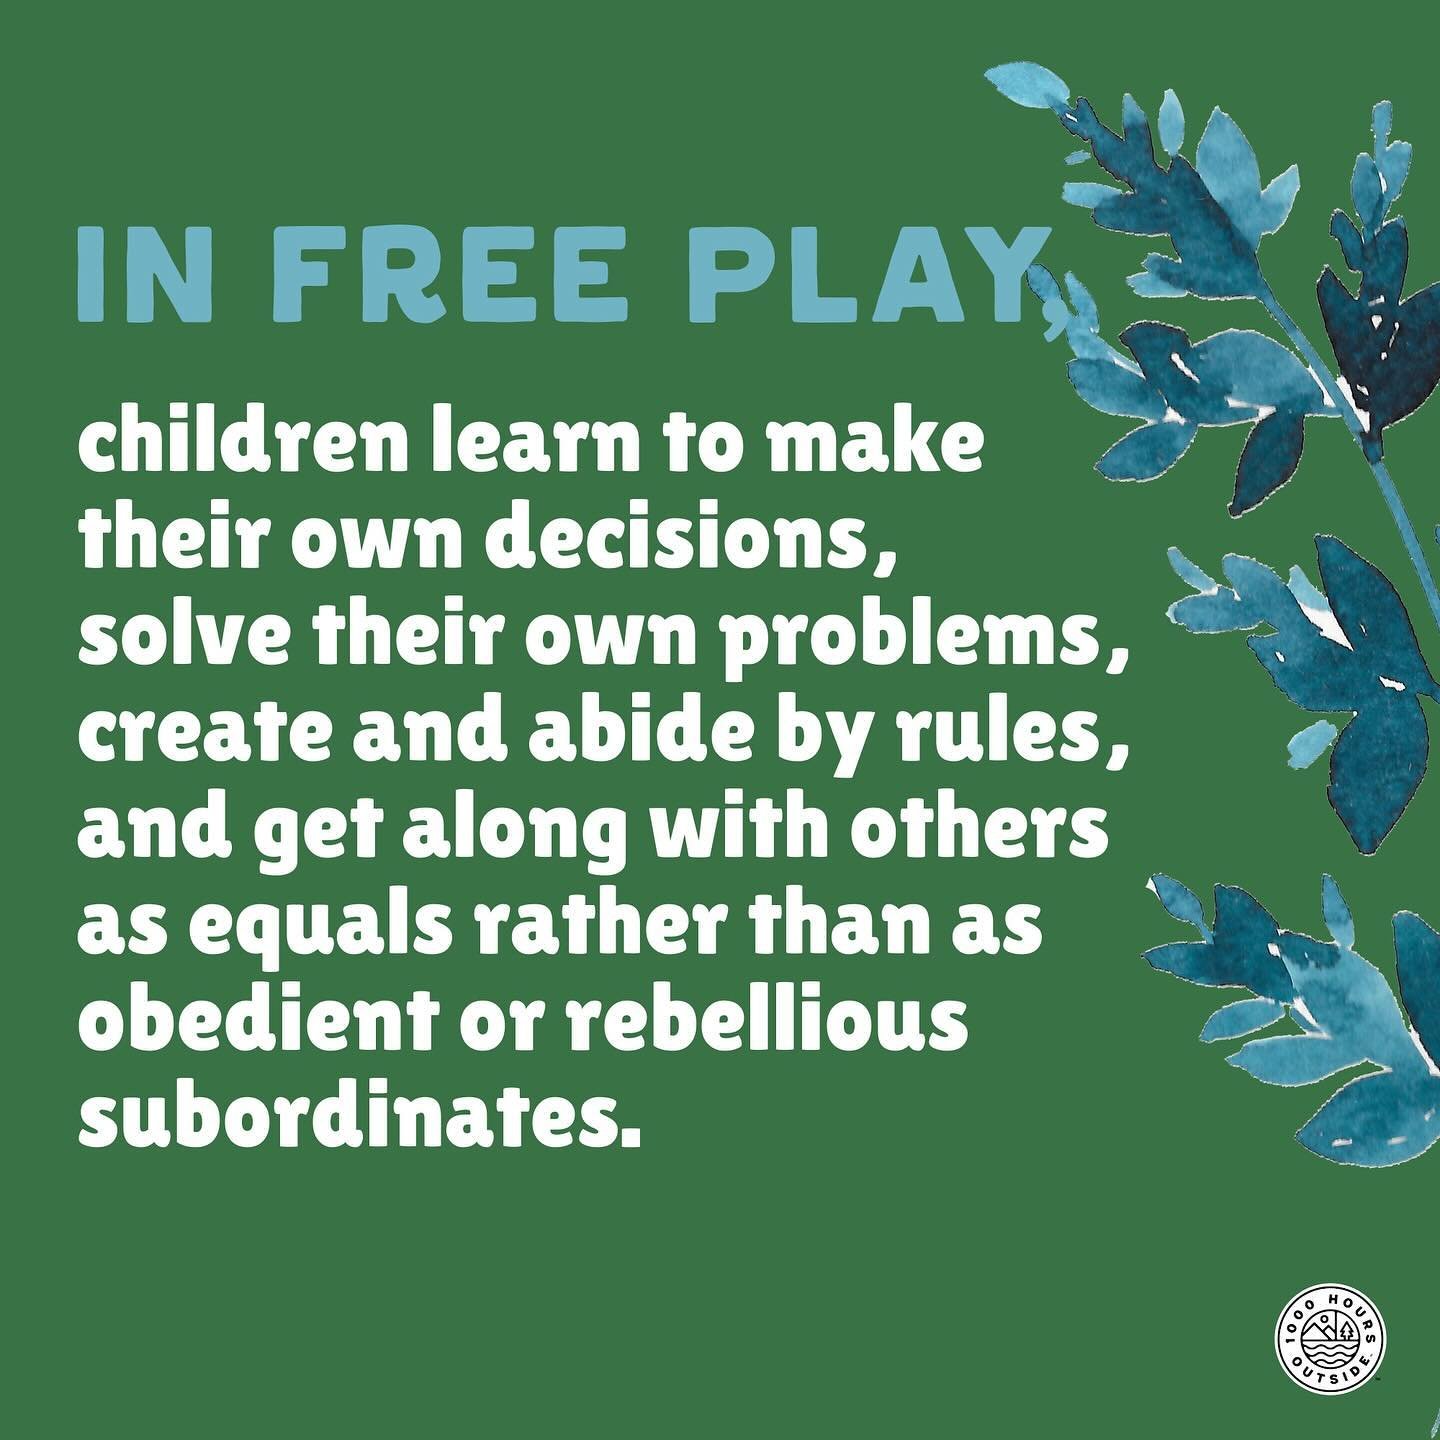 Every type of play has benefits! ➡️

Listen to more of Dr. Peter Gray on our podcast! Check out a clip on slide 8️⃣. Save for later inspiration and share with a friend who loves to play. 🥰

#1000hoursoutside #the1000hoursoutsidepodcast #freetolearn 